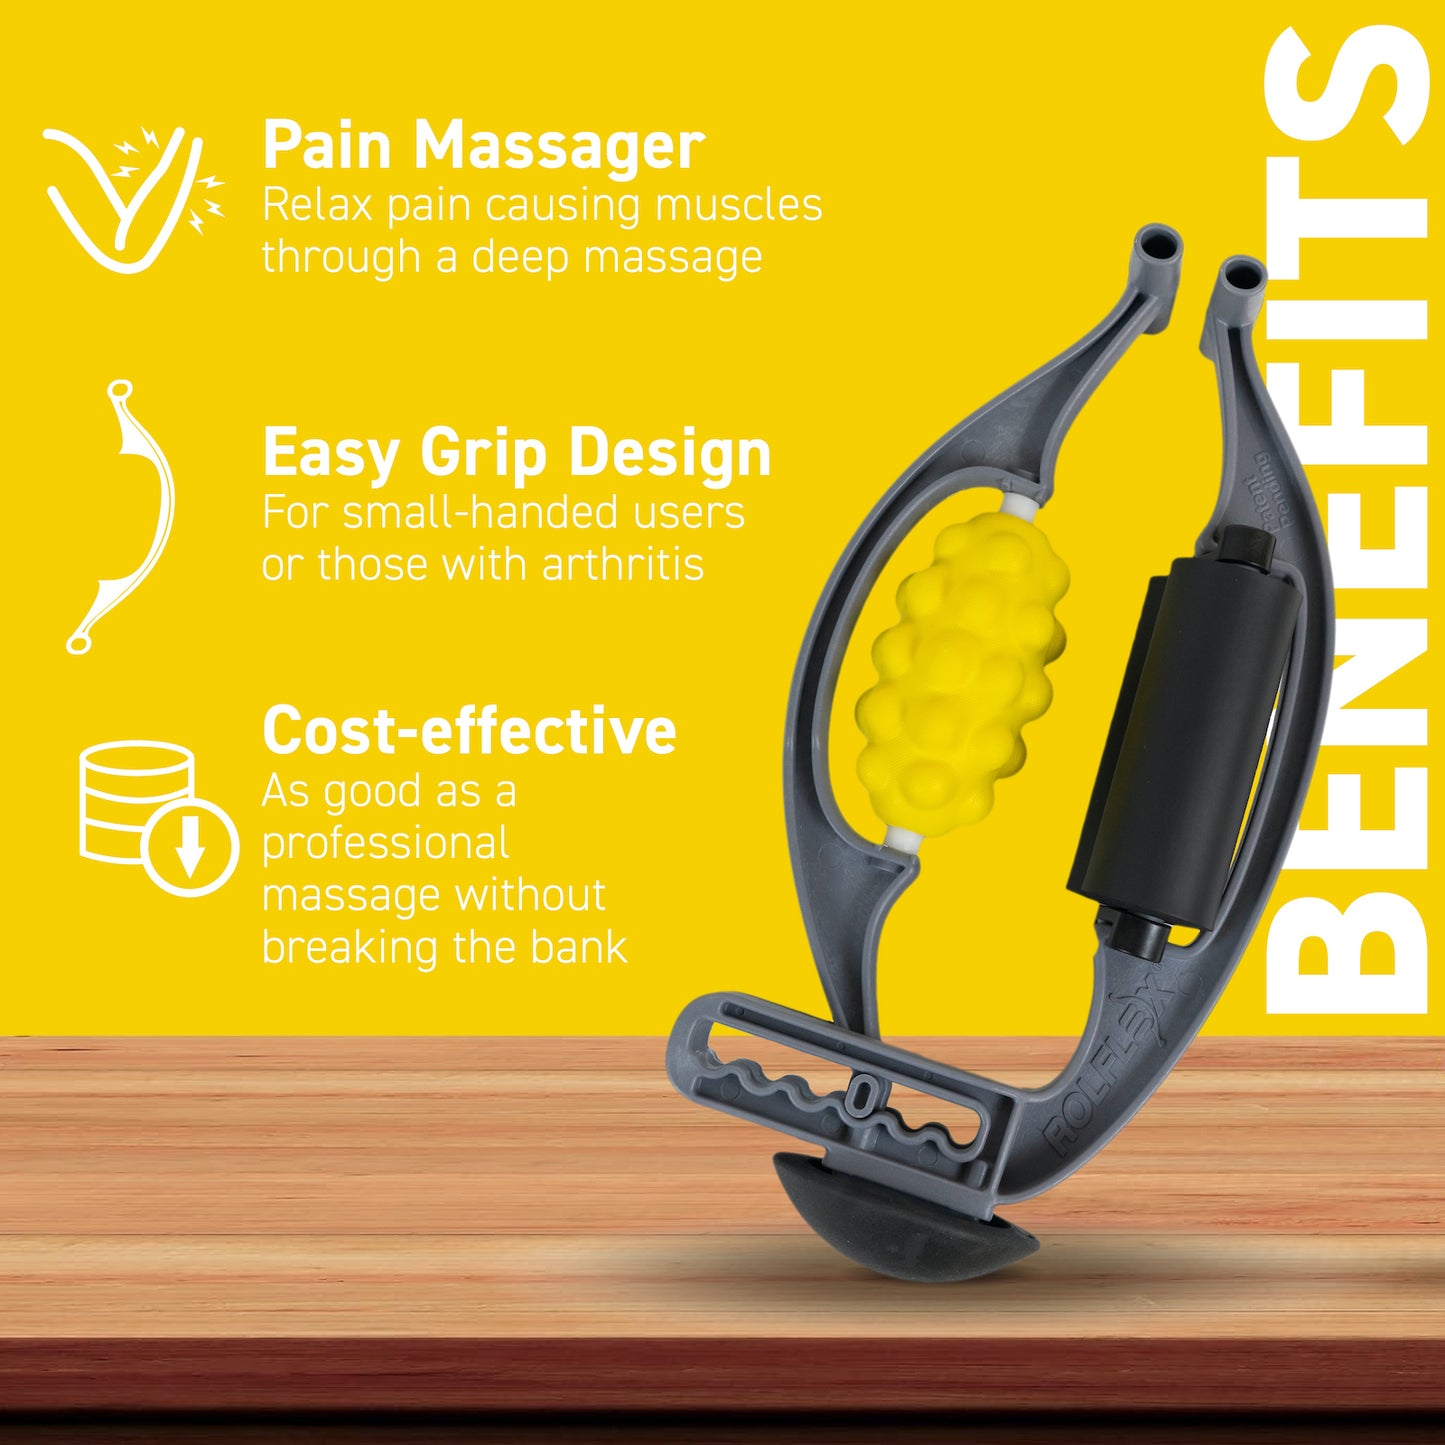 Our #1 Selling Product | The Massage Combo